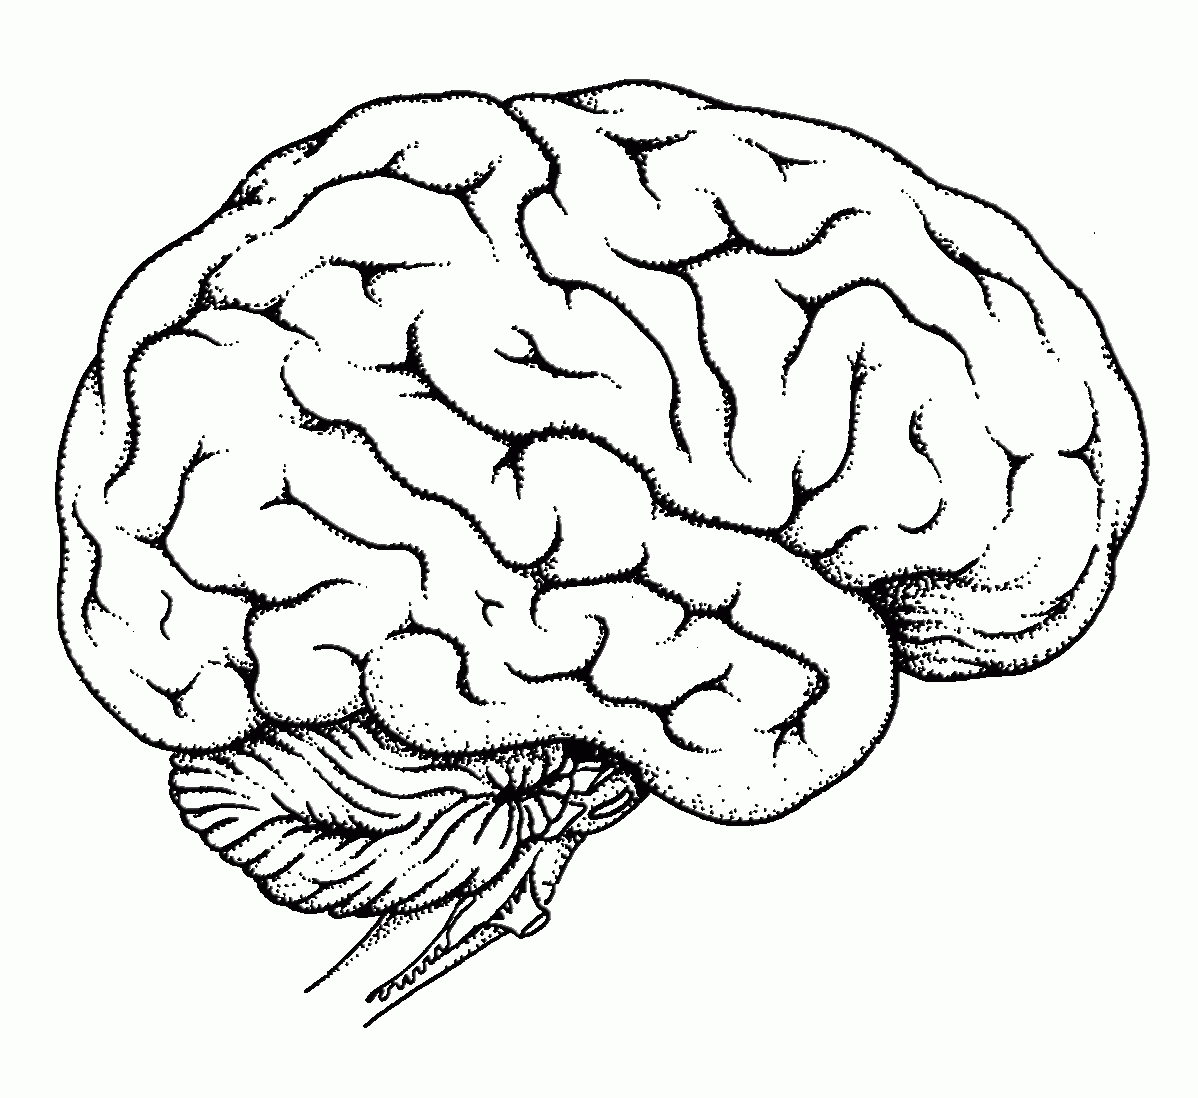 Human Brain Coloring Page  Coloring Home Within Brain Coloring Worksheet